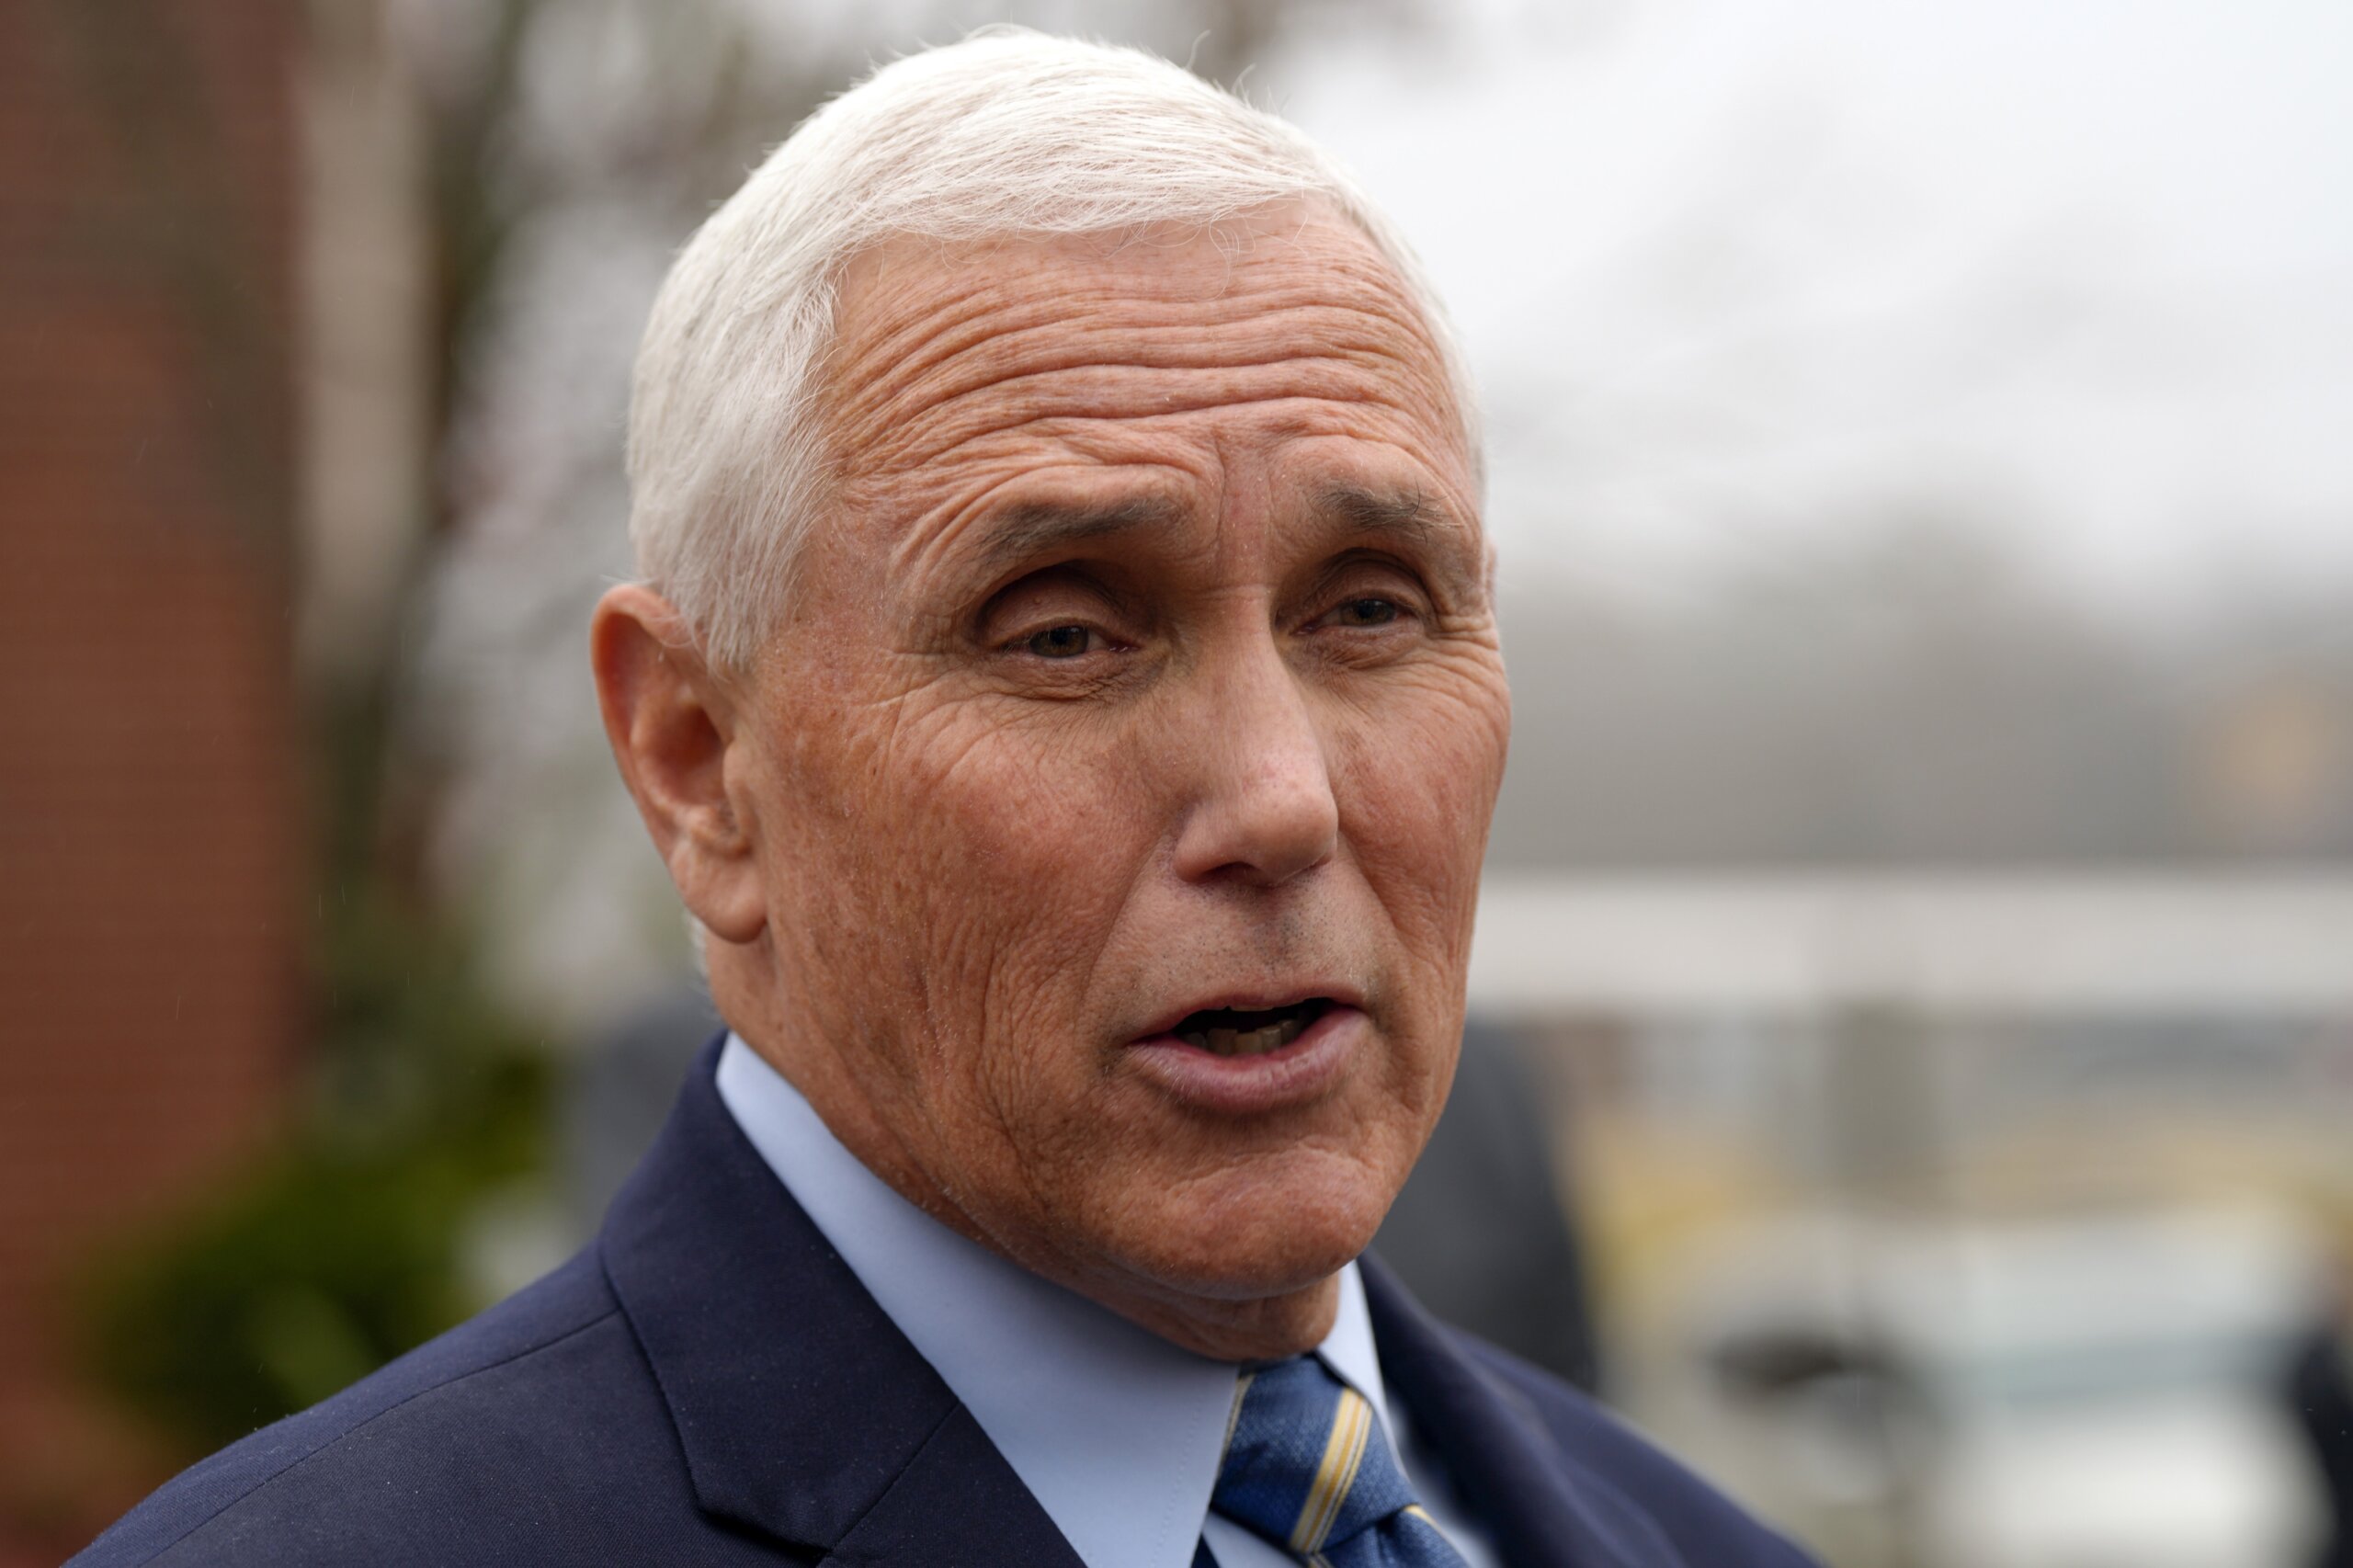 Operative jumps from Haley PAC to Pence’s amid 2024 jostling